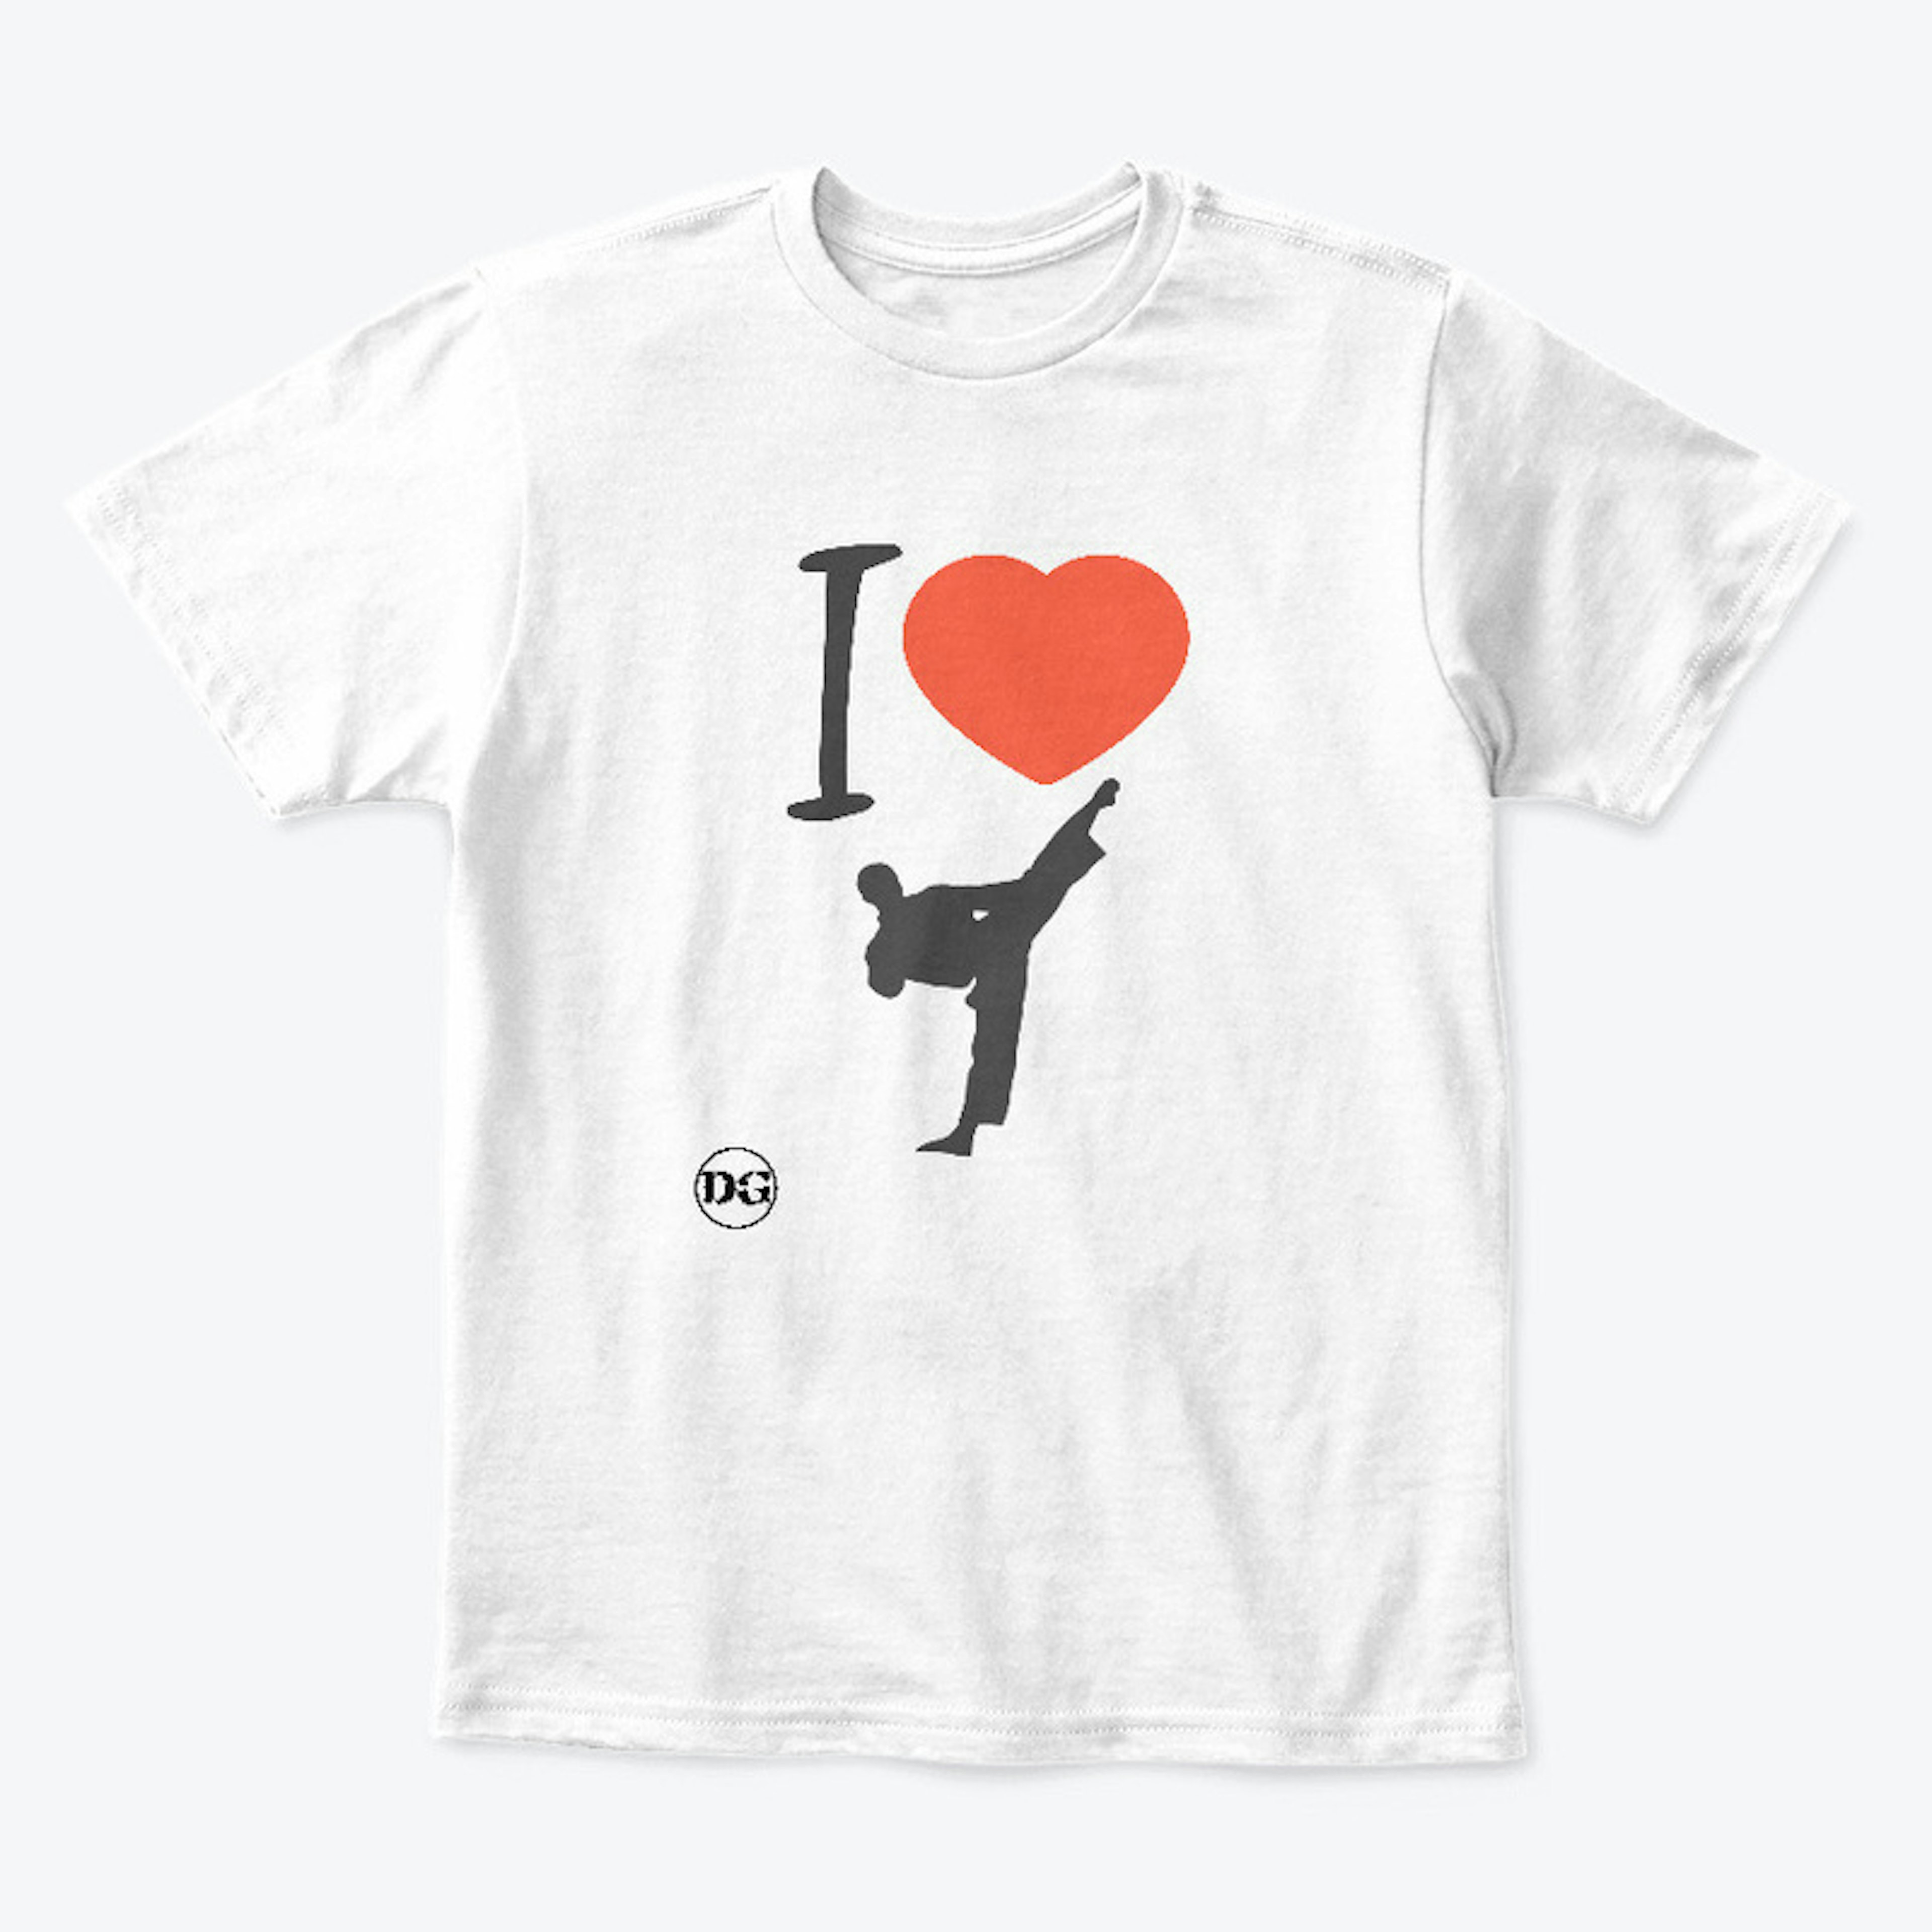 I Love TKD T-Shirts and More!